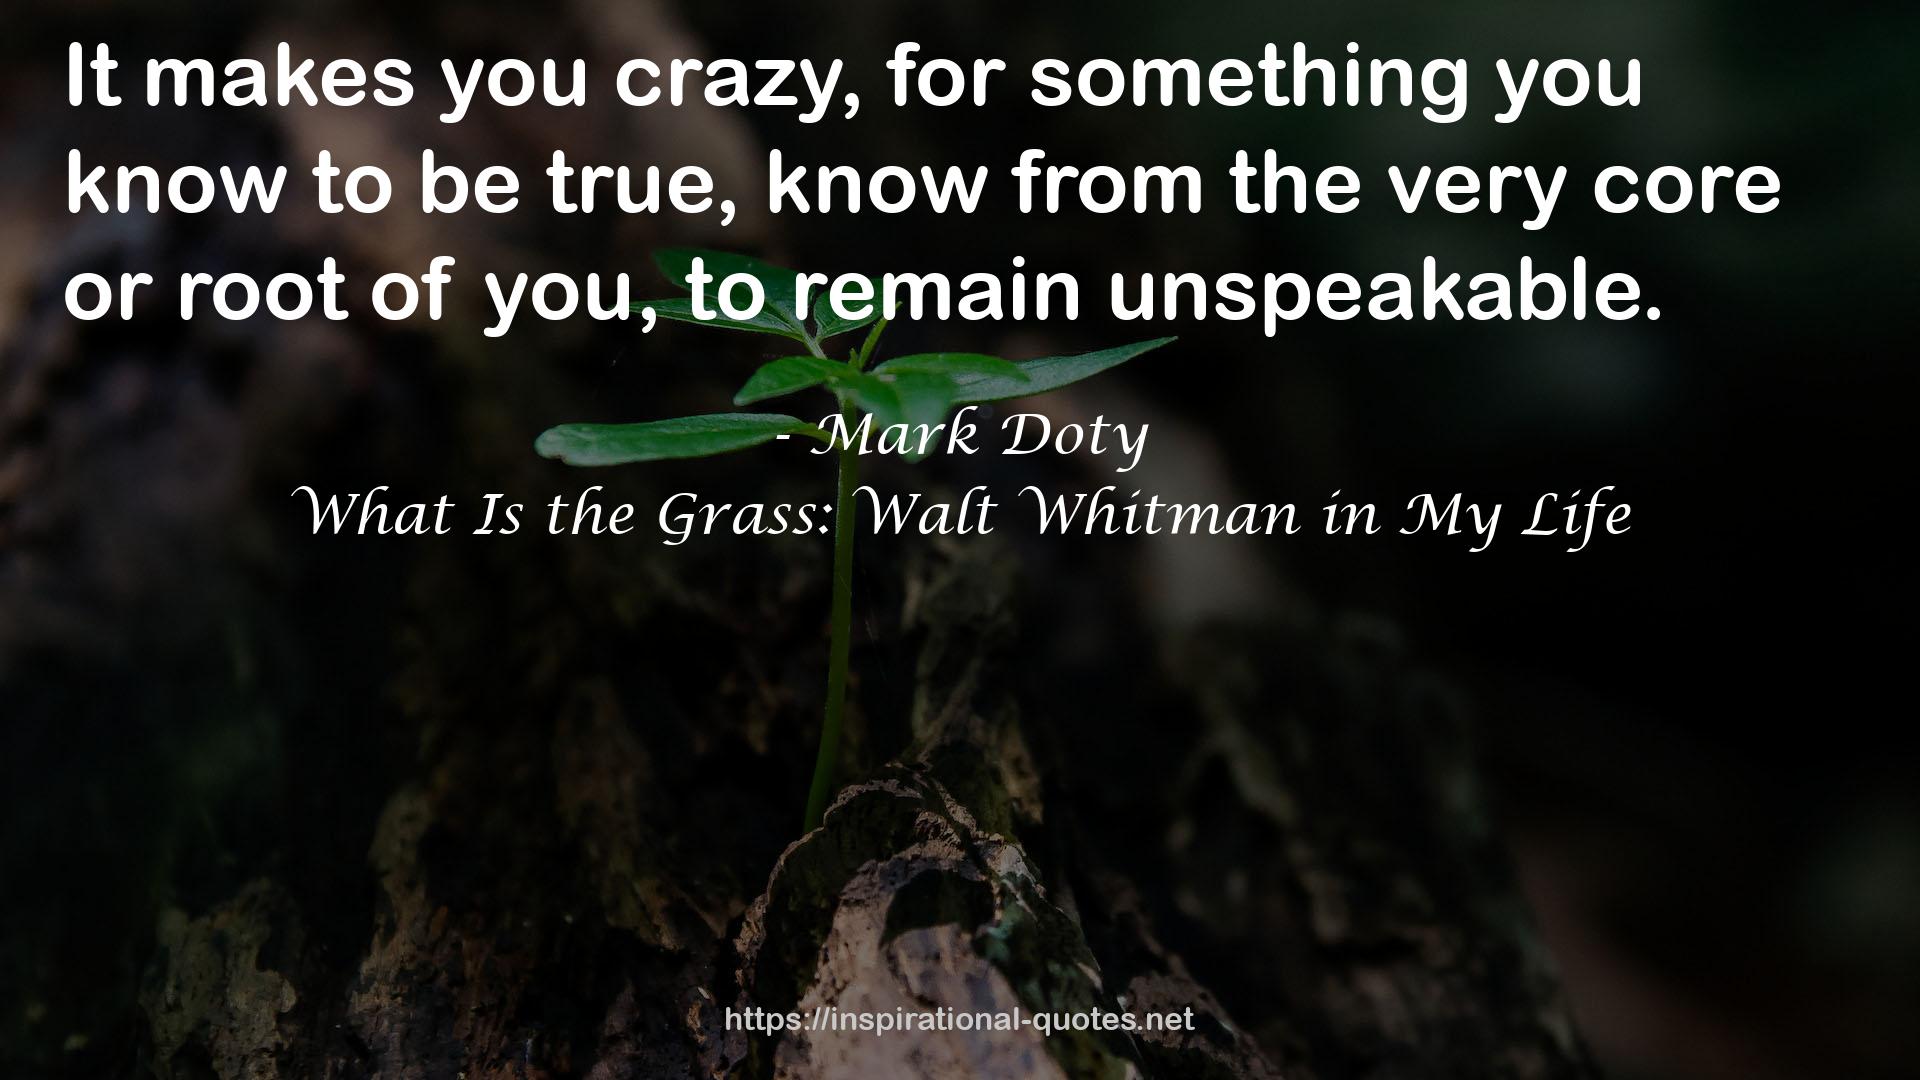 What Is the Grass: Walt Whitman in My Life QUOTES